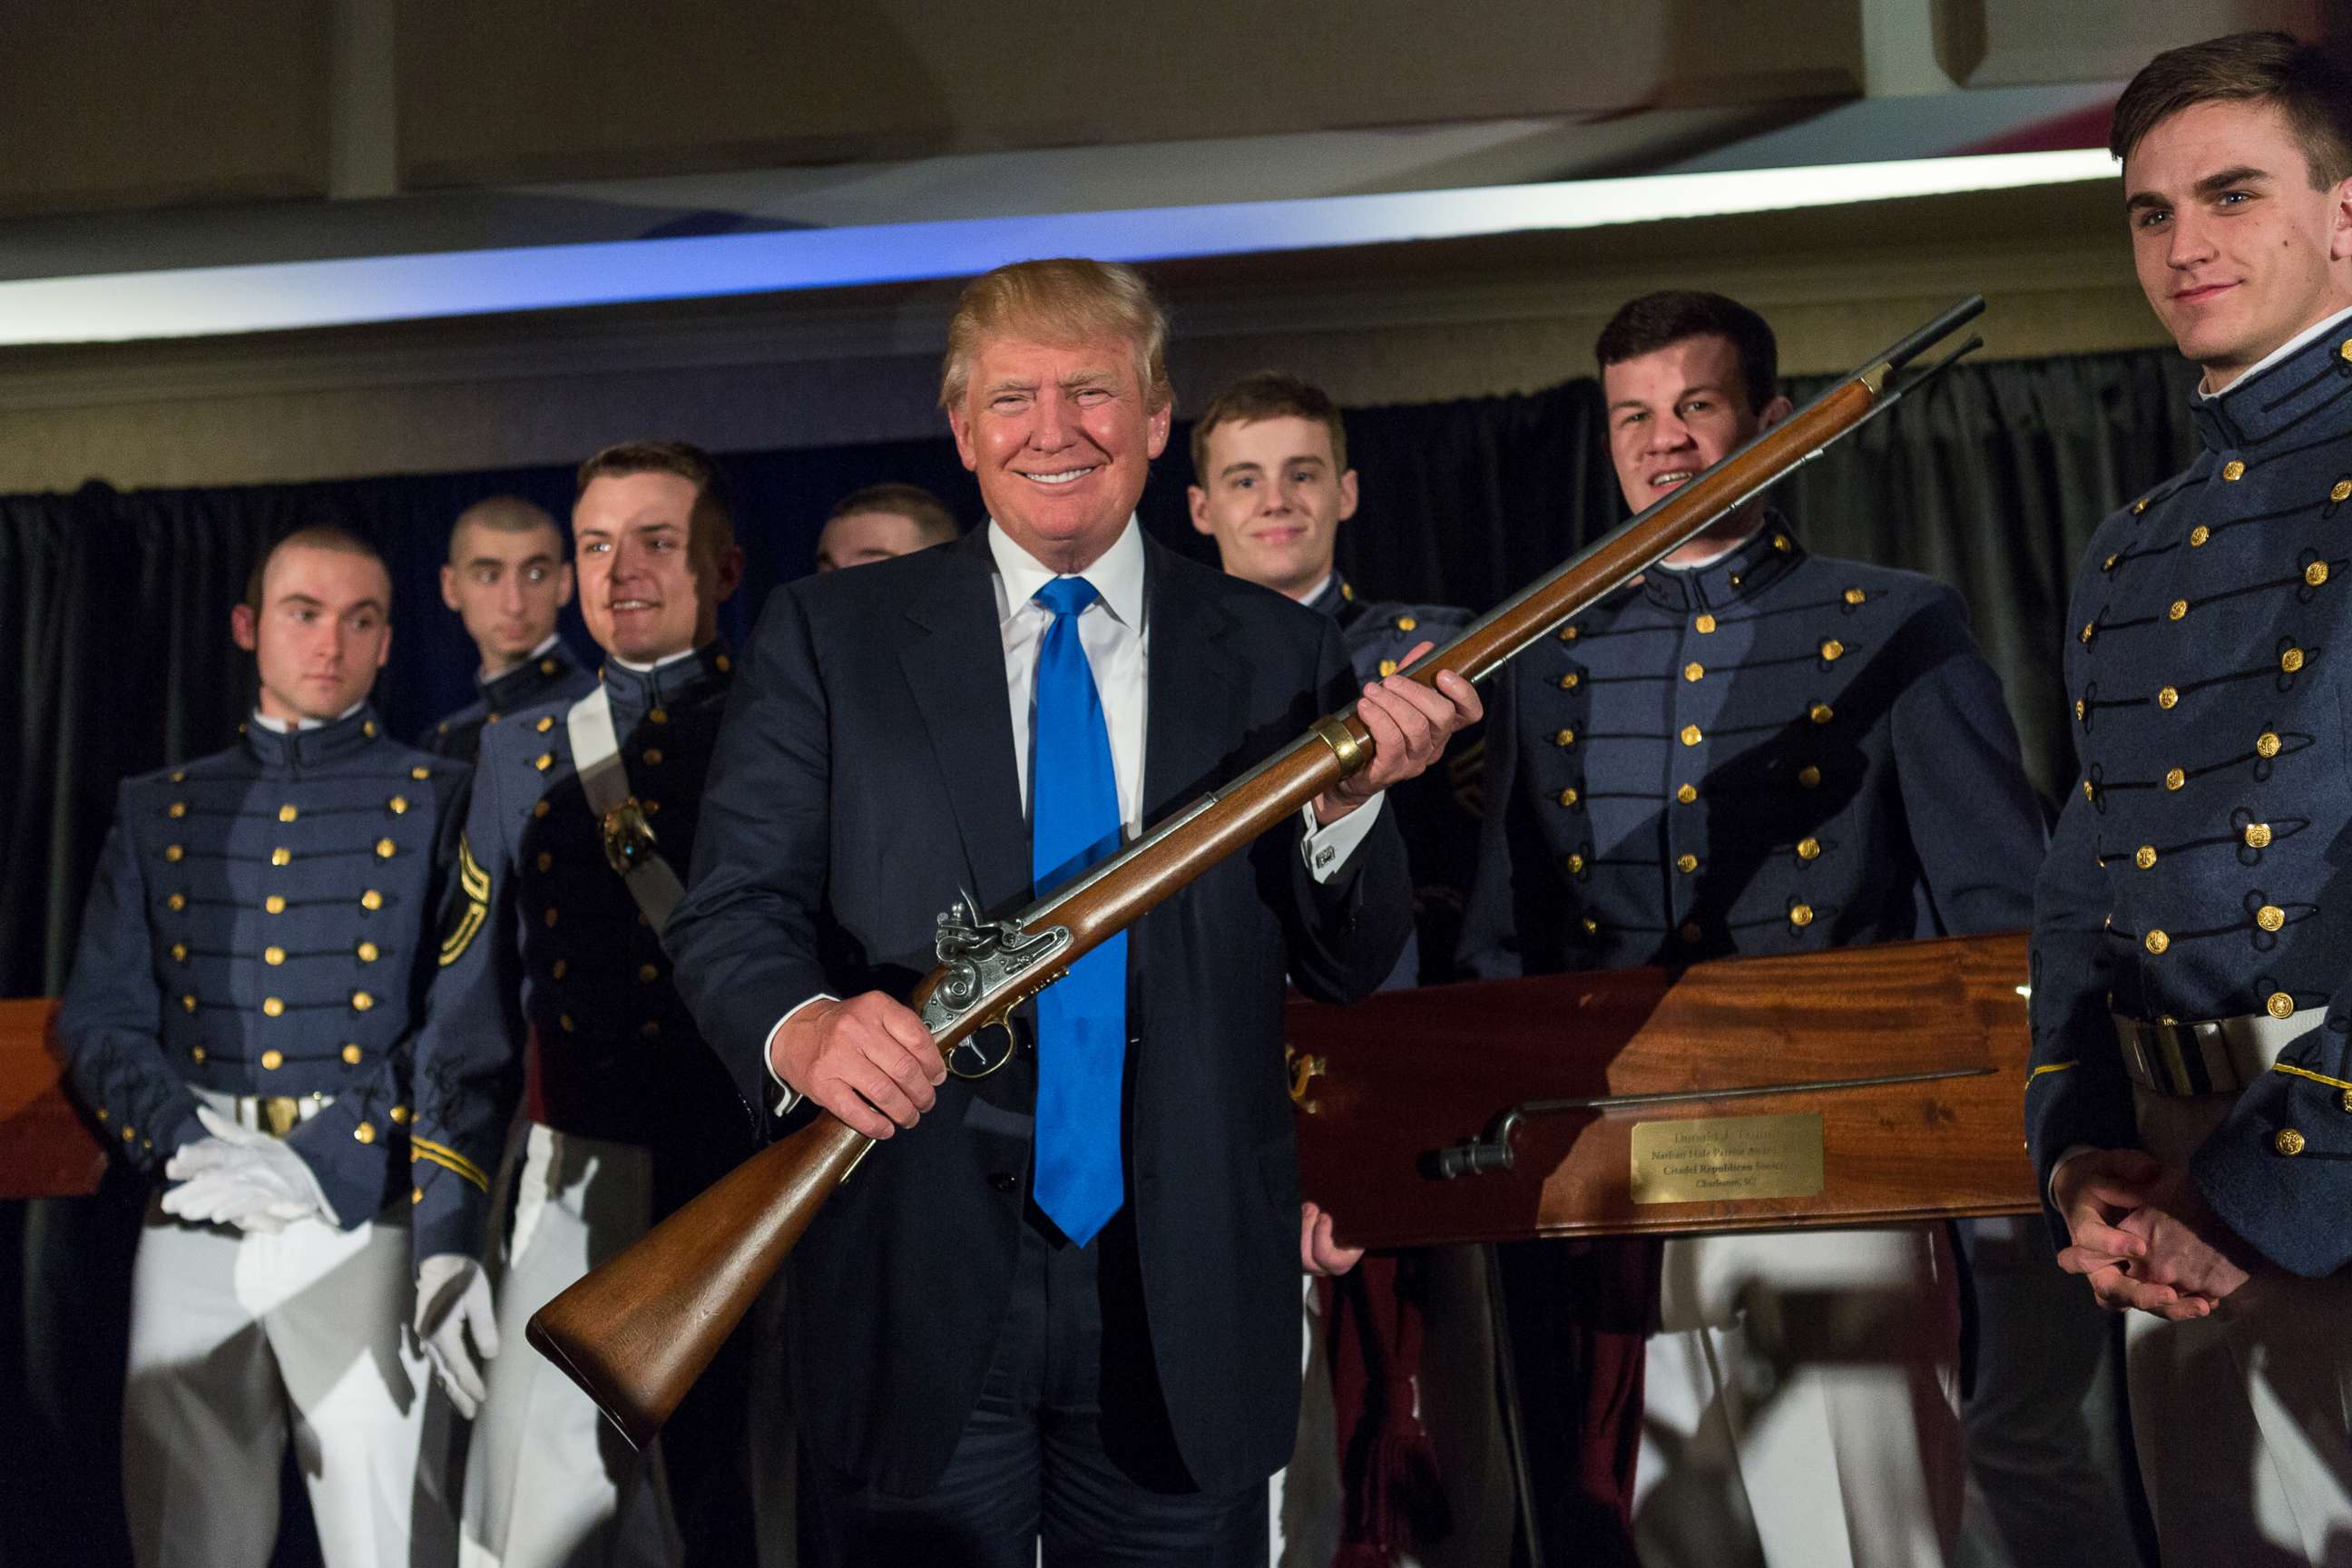 PHOTO: Reality TV host and New York real estate mogul Donald Trump holds up a replica flintlock rifle awarded him by cadets during the Republican Society Patriot Dinner at the Citadel Military College, Feb. 22, 2015 in Charleston, S.C.